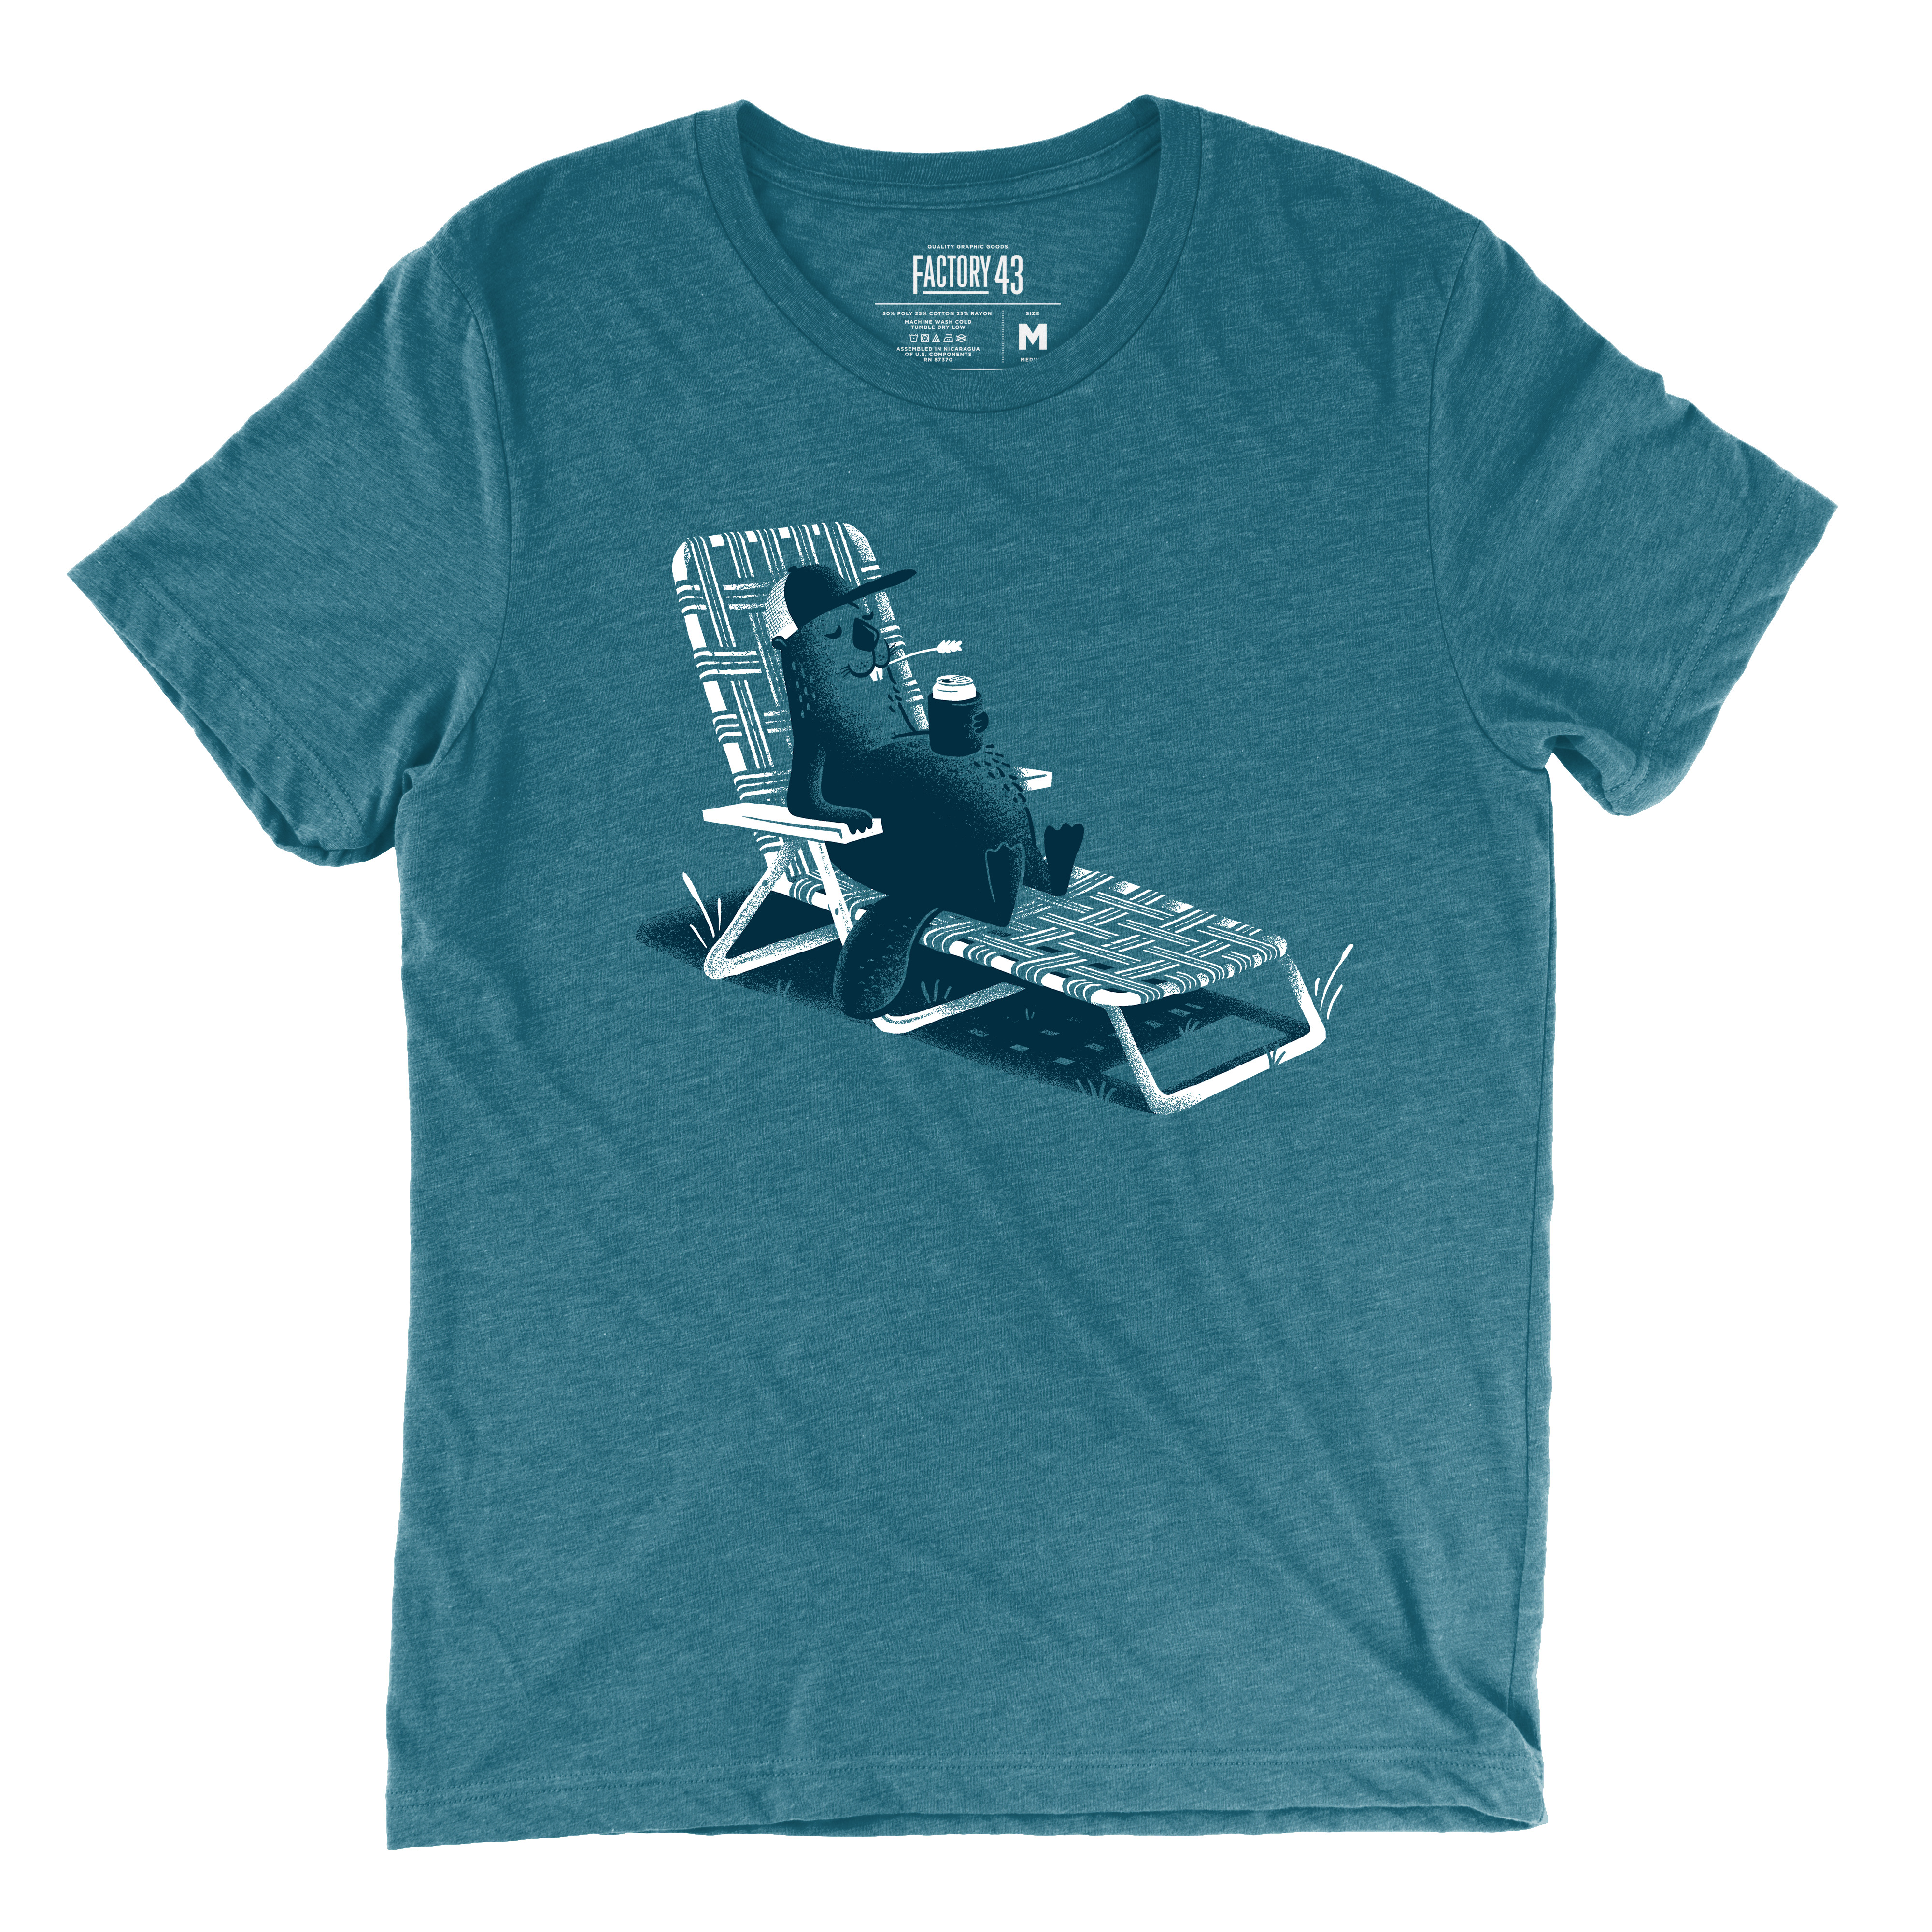 Steel blue tee of beaver in a lawnchair drinking a beer or soda. 